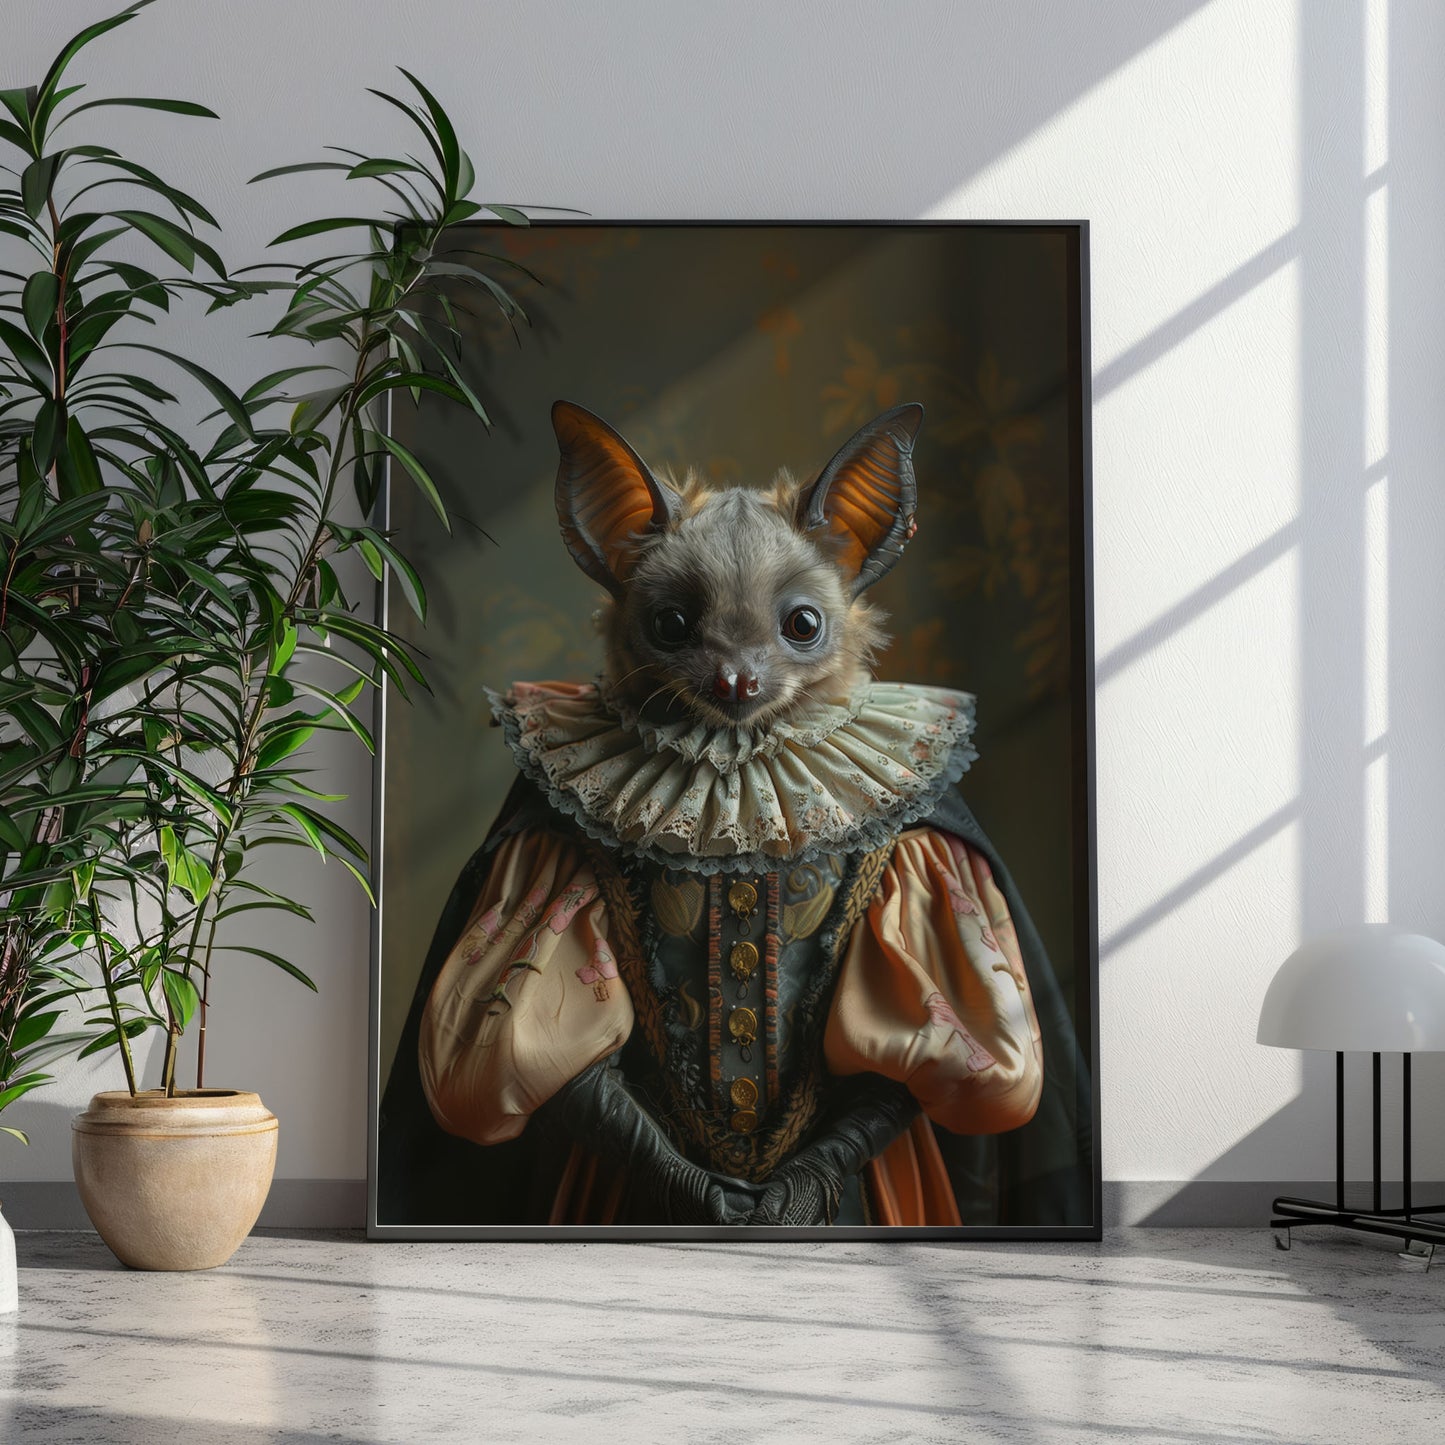 Dark Aesthetic Wall Art - Gothic Bat in Dress Poster for a Unique Look